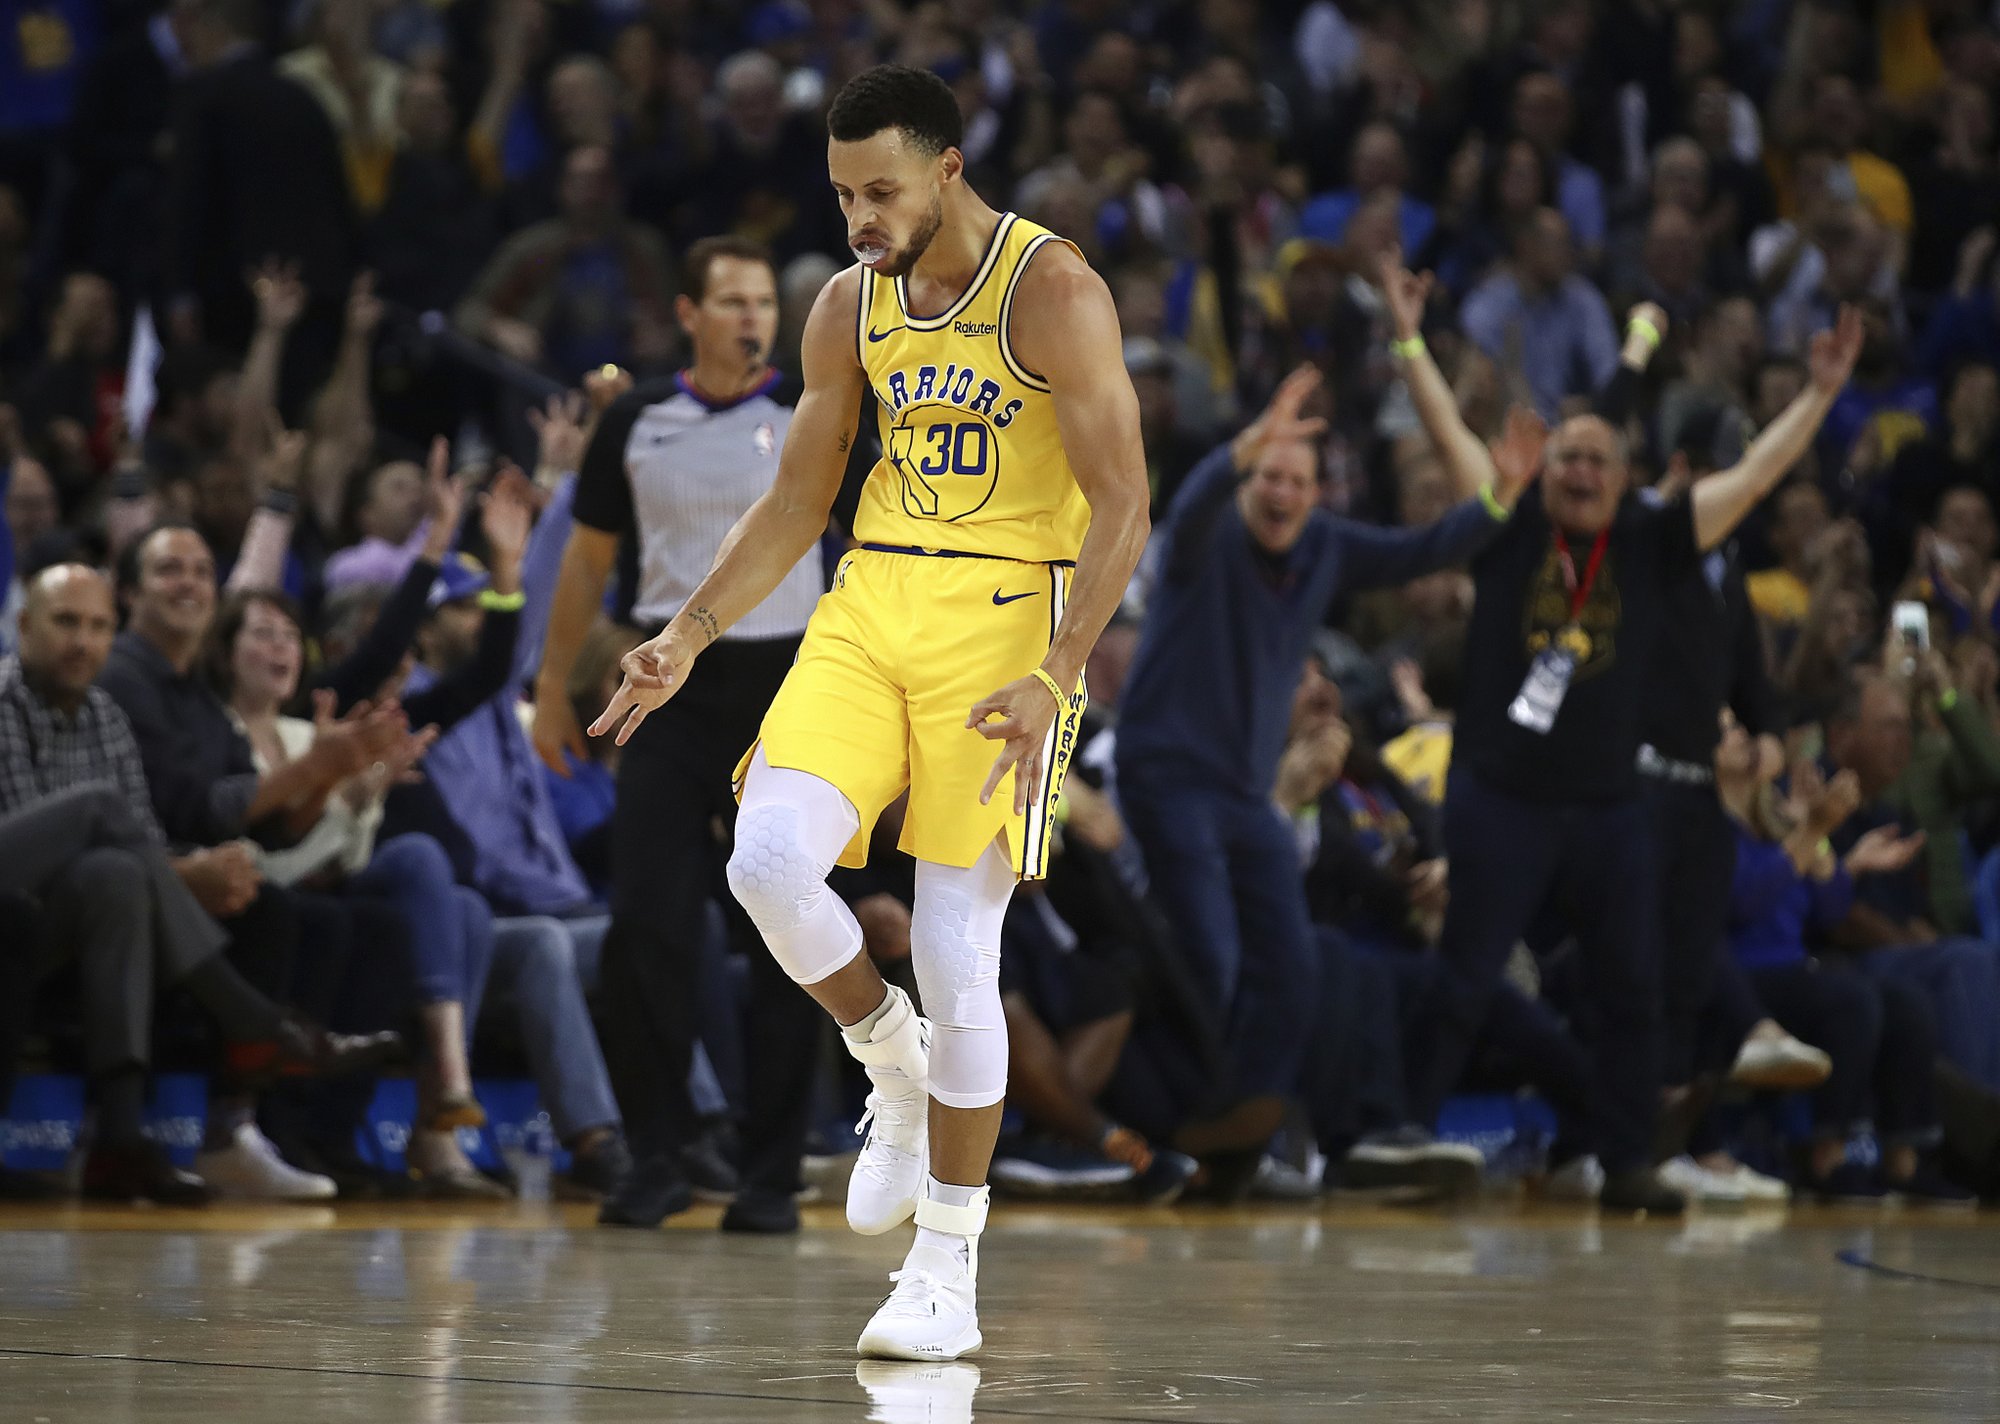 Stephen Curry dazzles for 51 points in sensational start.